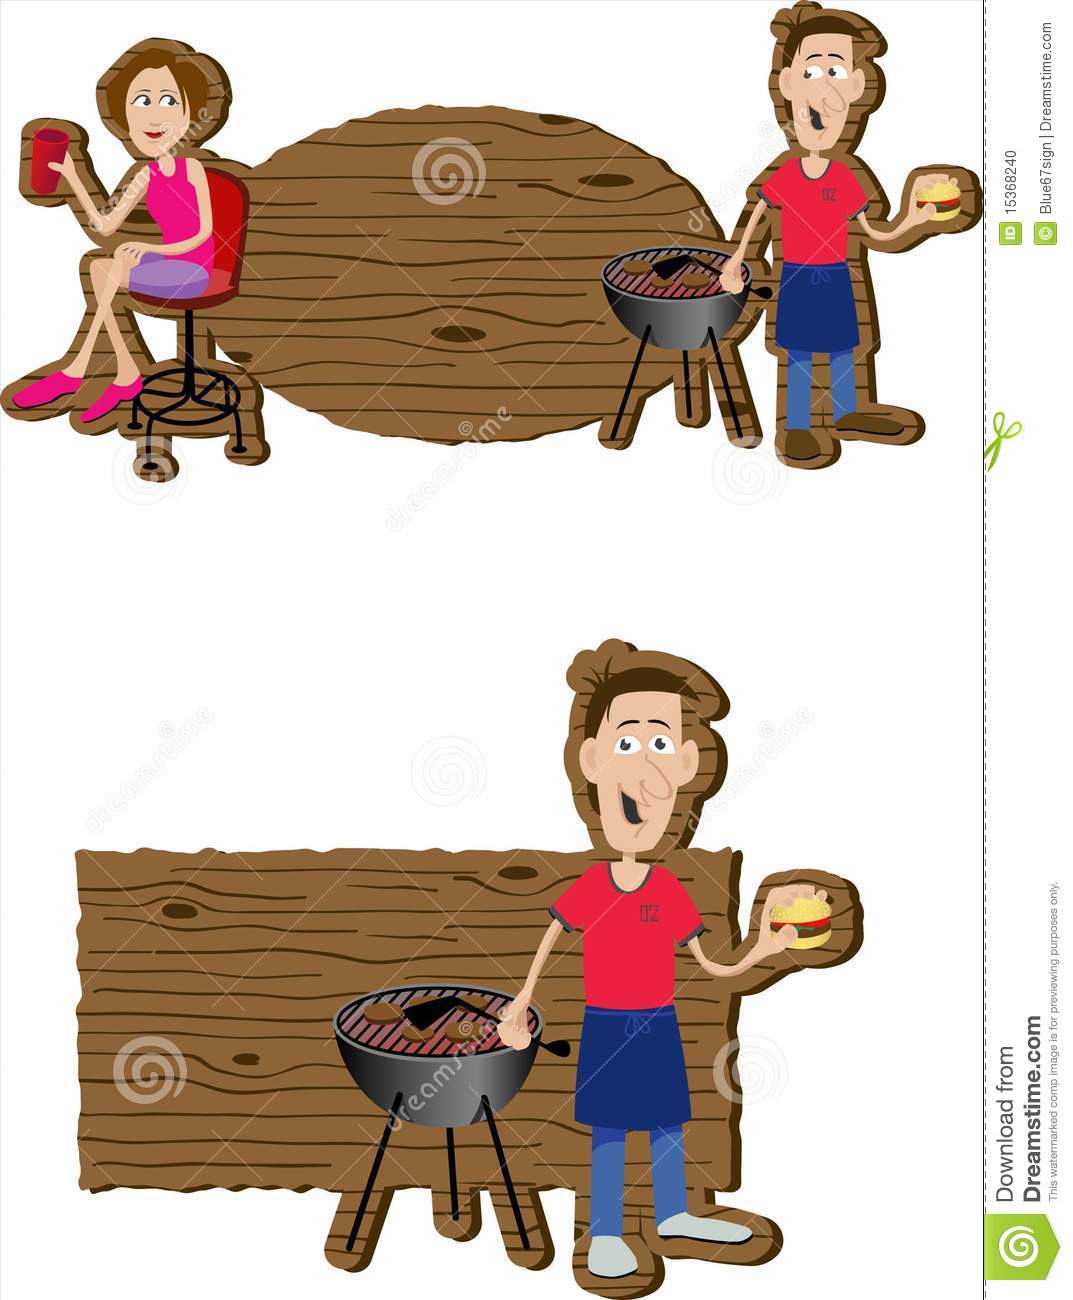 Bbq Signs Stock Photo   Image  15368240